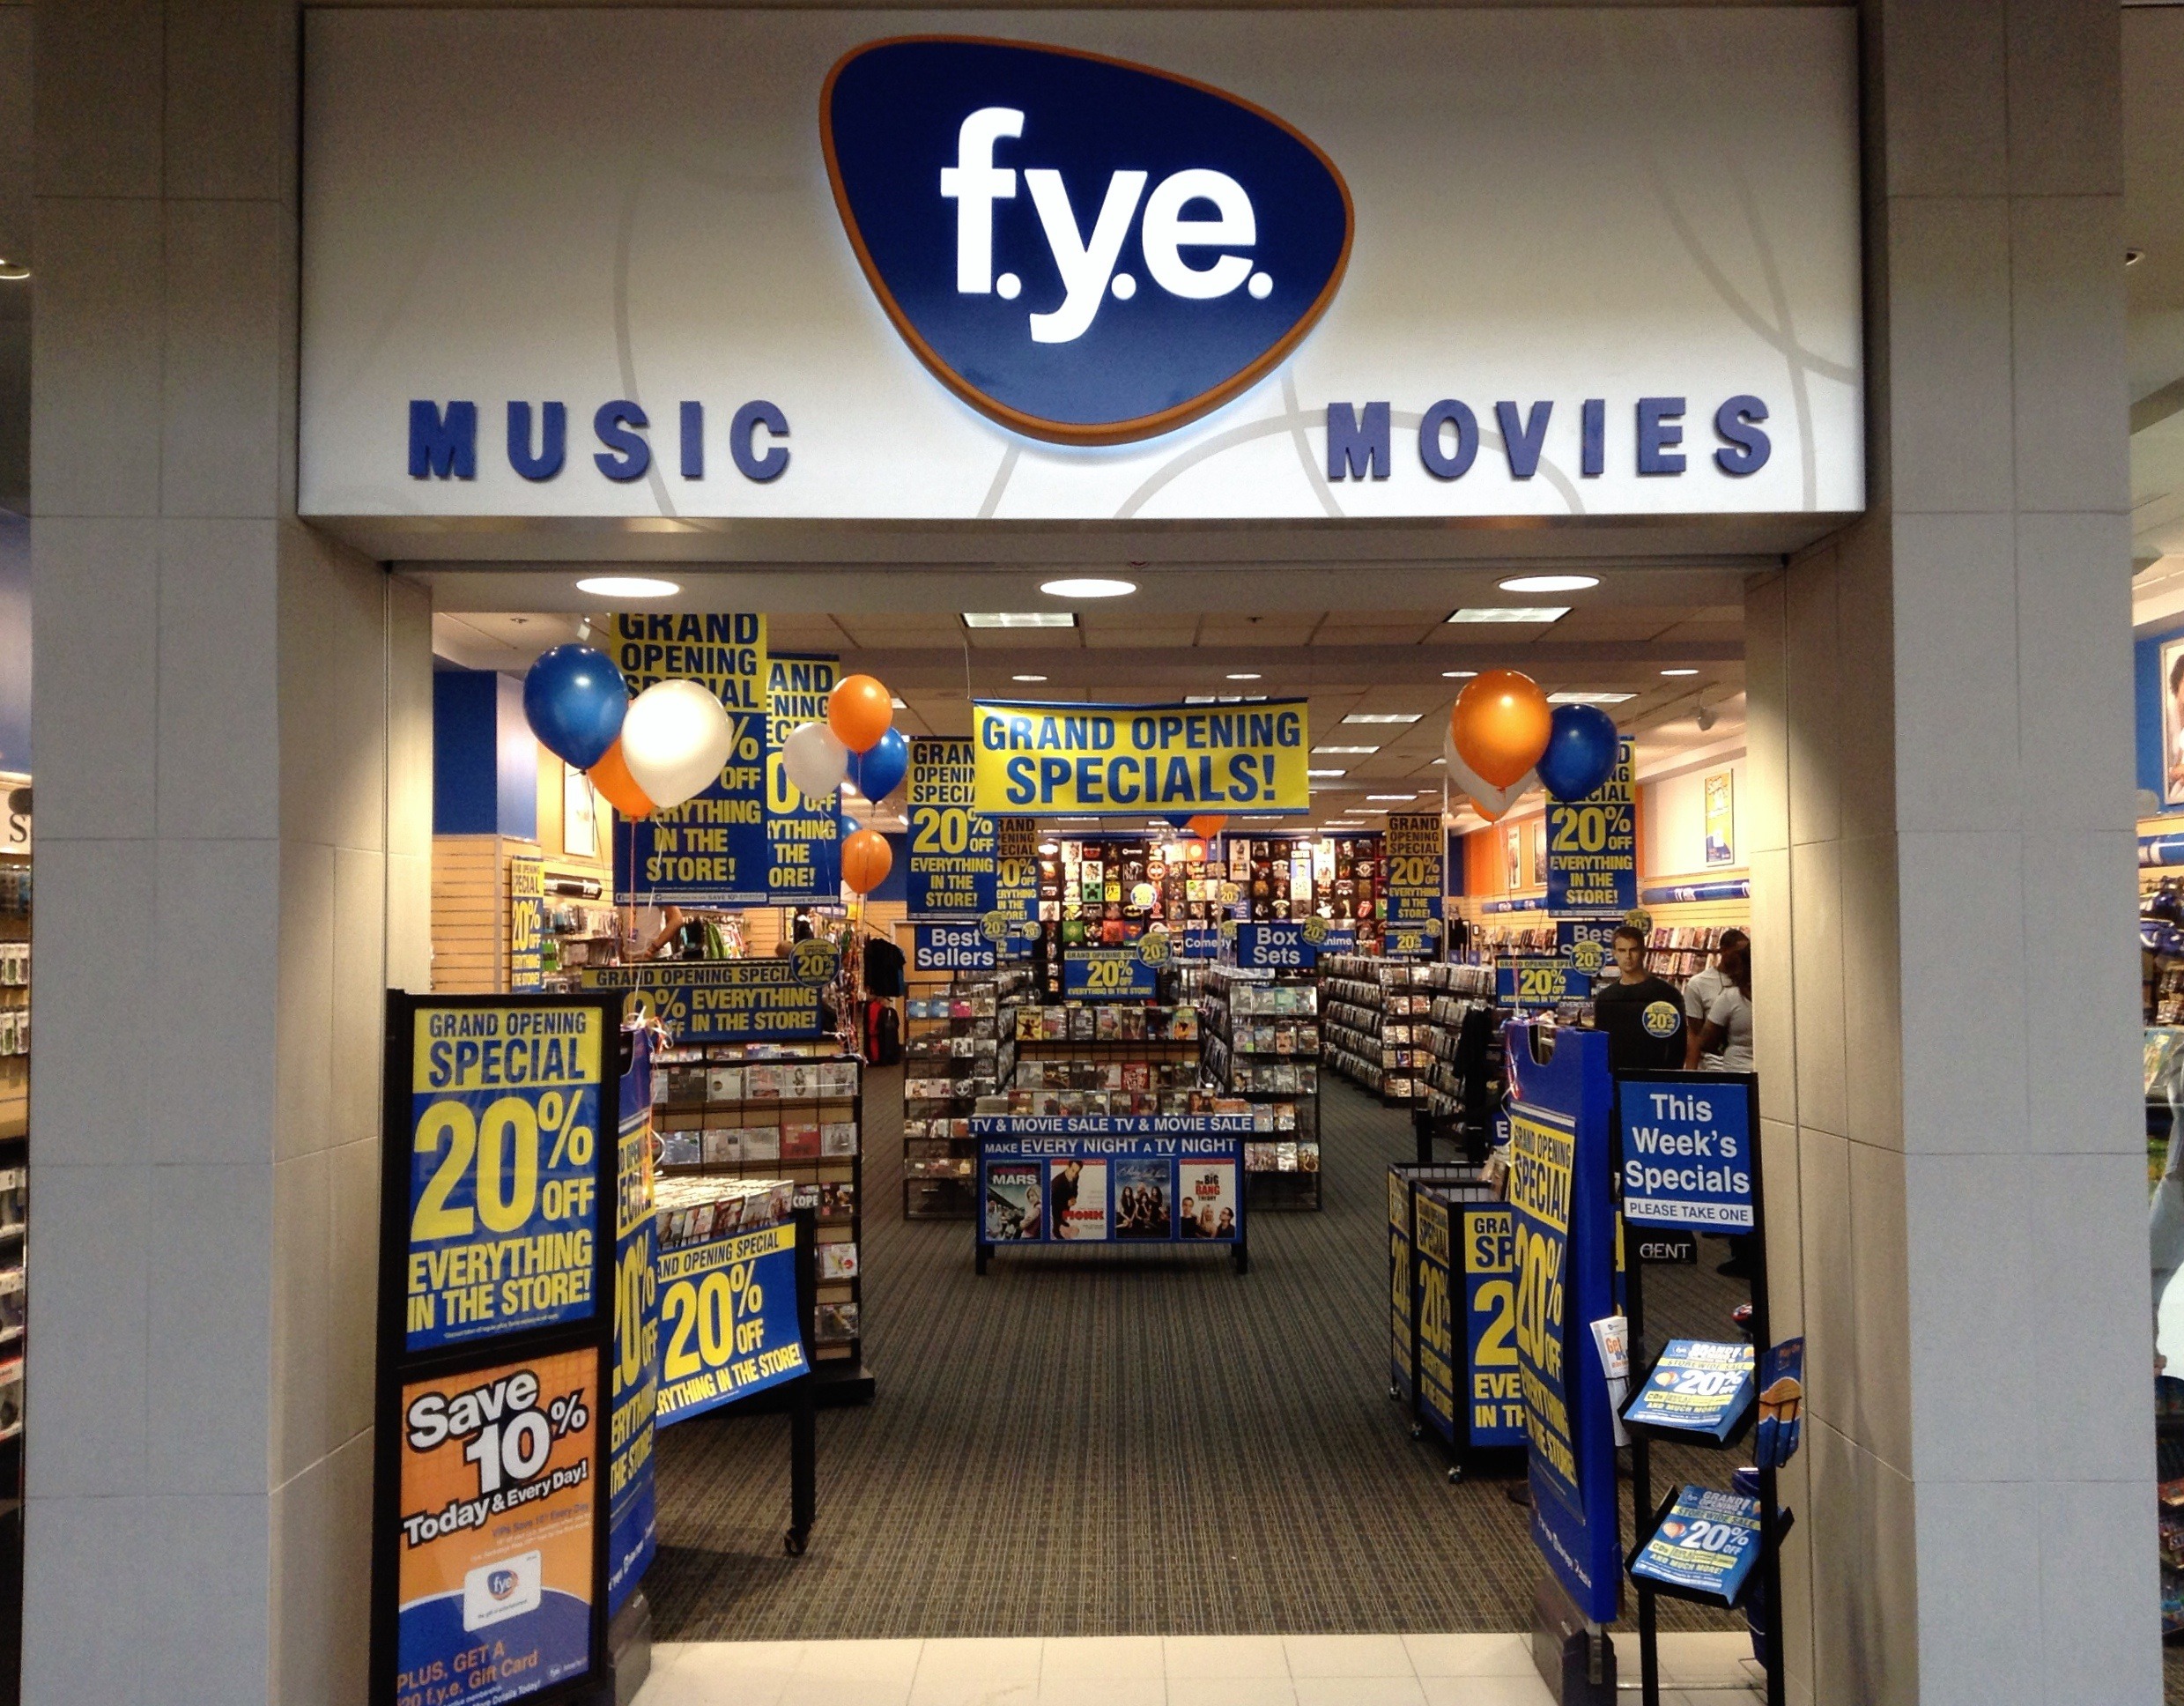 How To Check Your FYE Gift Card Balance